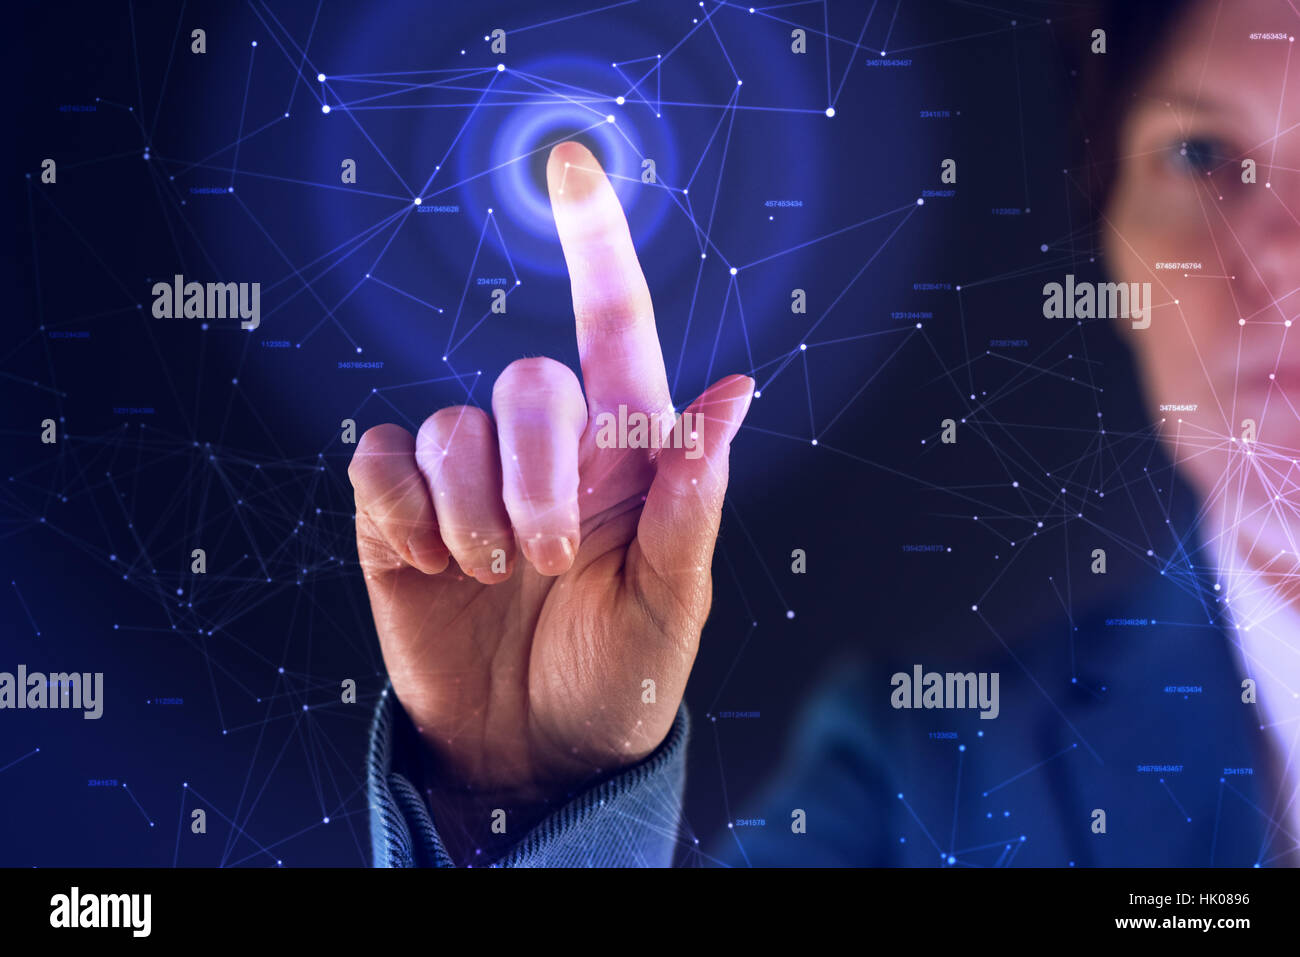 Businesswoman working in futuristic cyberspace hightech environment, hand pushing interface button Stock Photo